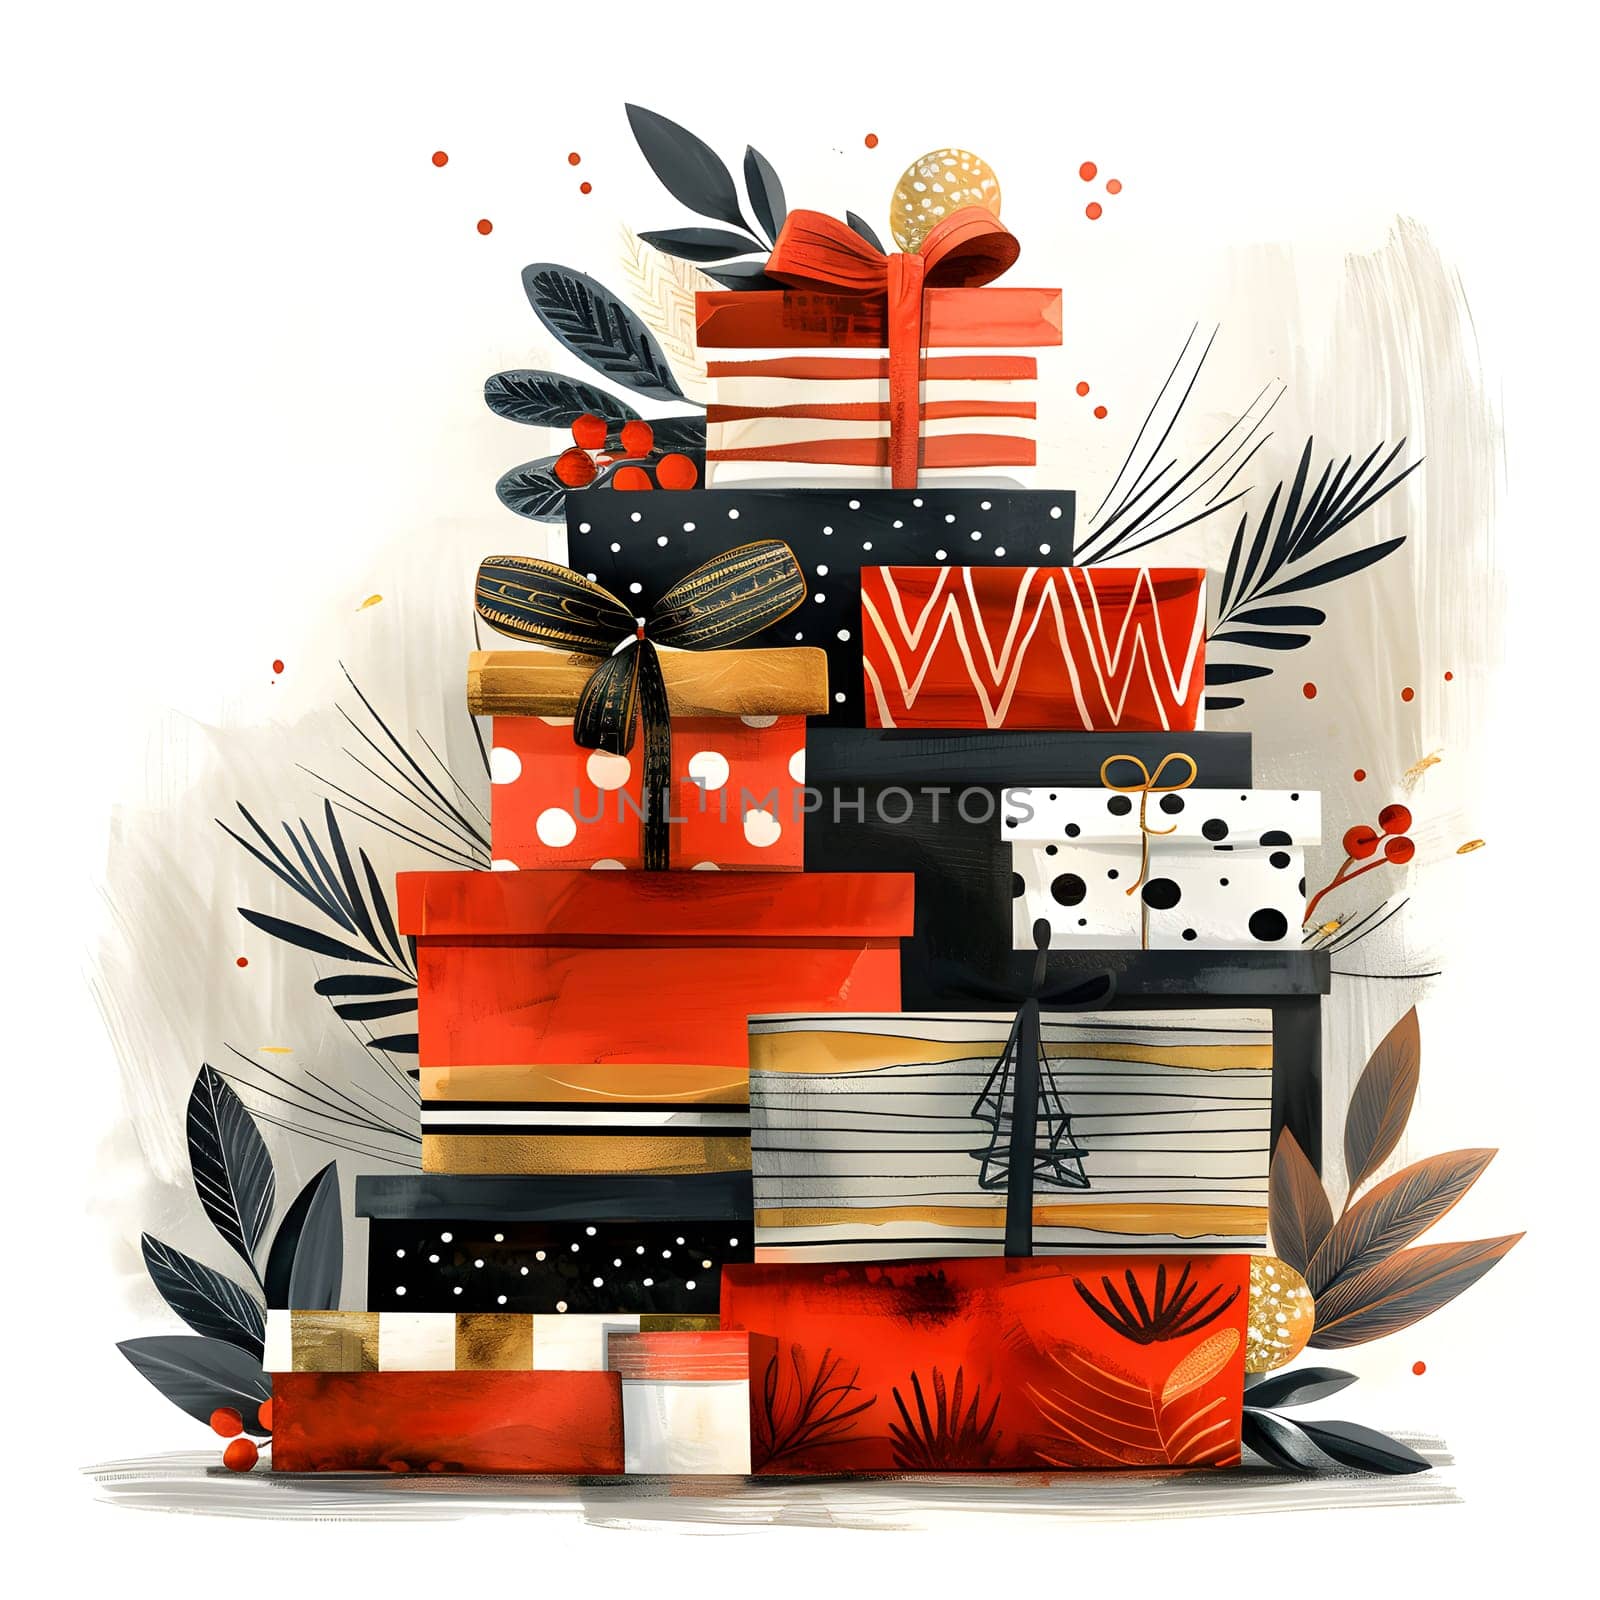 A stack of Christmas gifts piled high, creating a festive display by Nadtochiy